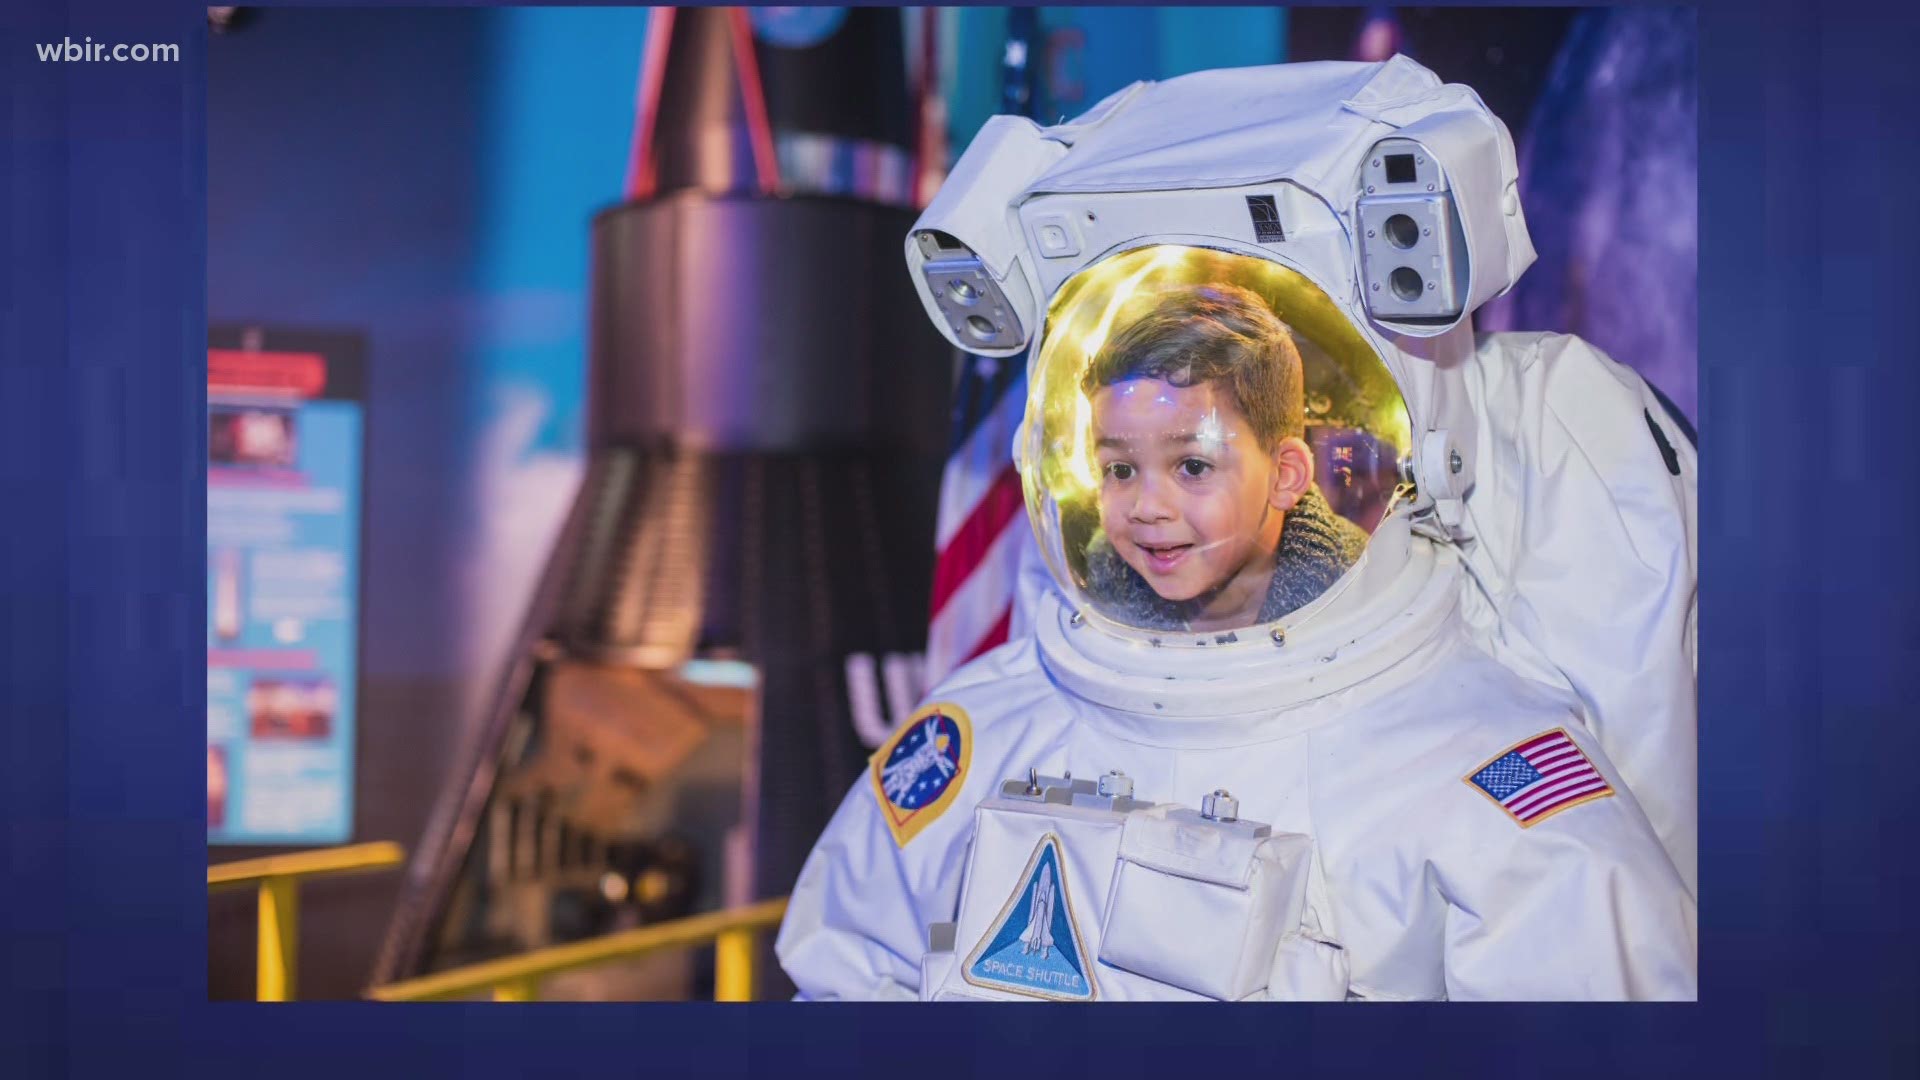 WonderWorks in Pigeon Forge will launch a new exhibit on STEM careers. Nov. 5, 2020-4pm.